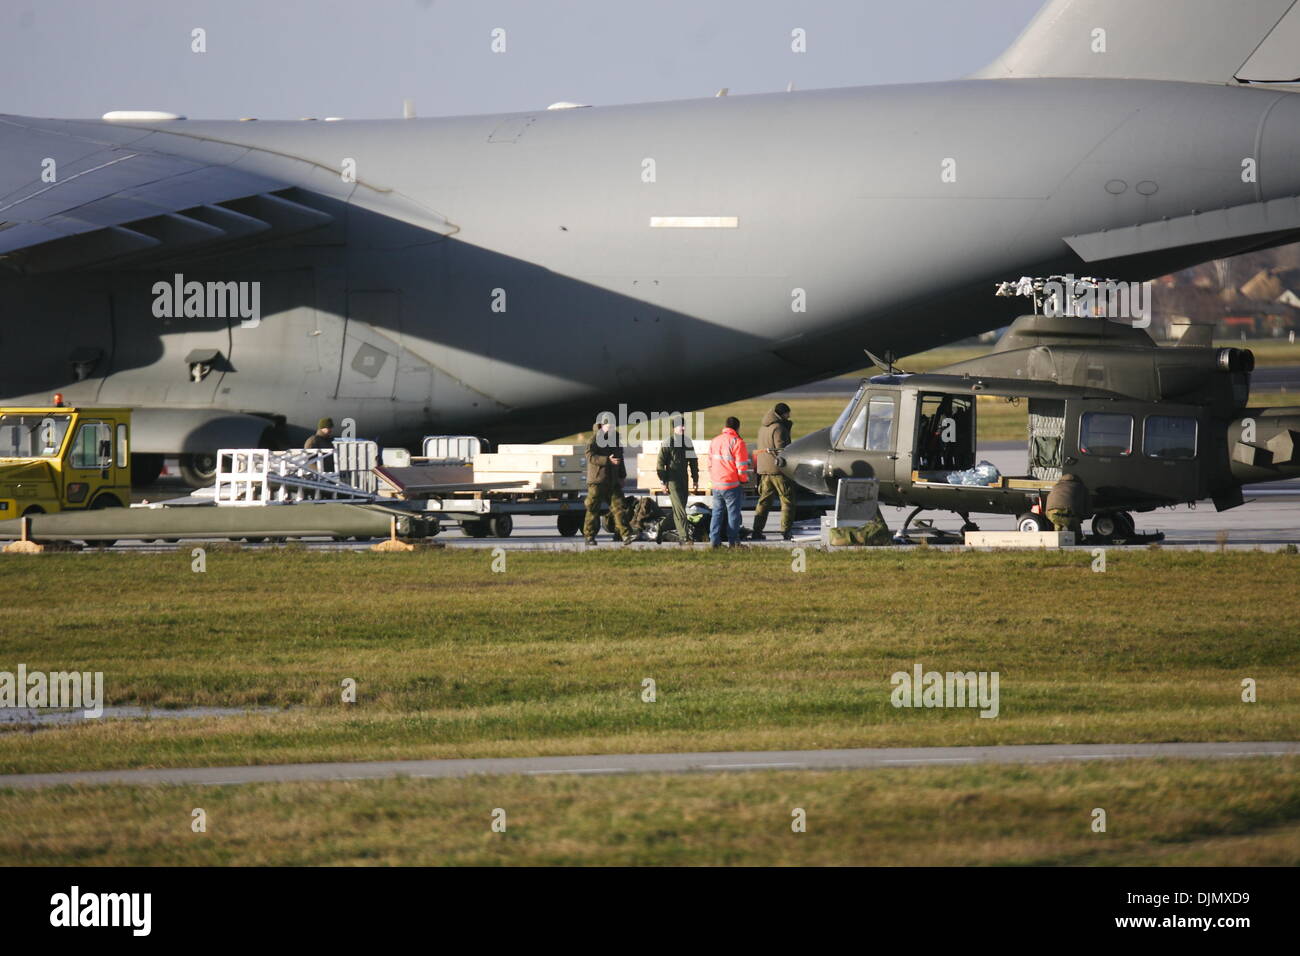 Gdansk, Poland 29th, November 2013 Loading two miliotary Bell 412 helicopters on the giant American transport aircraft  Boeing C-17 Globemaster board at the Gdansk Lech Walesa Airport. Credit:  Michal Fludra/Alamy Live News Stock Photo